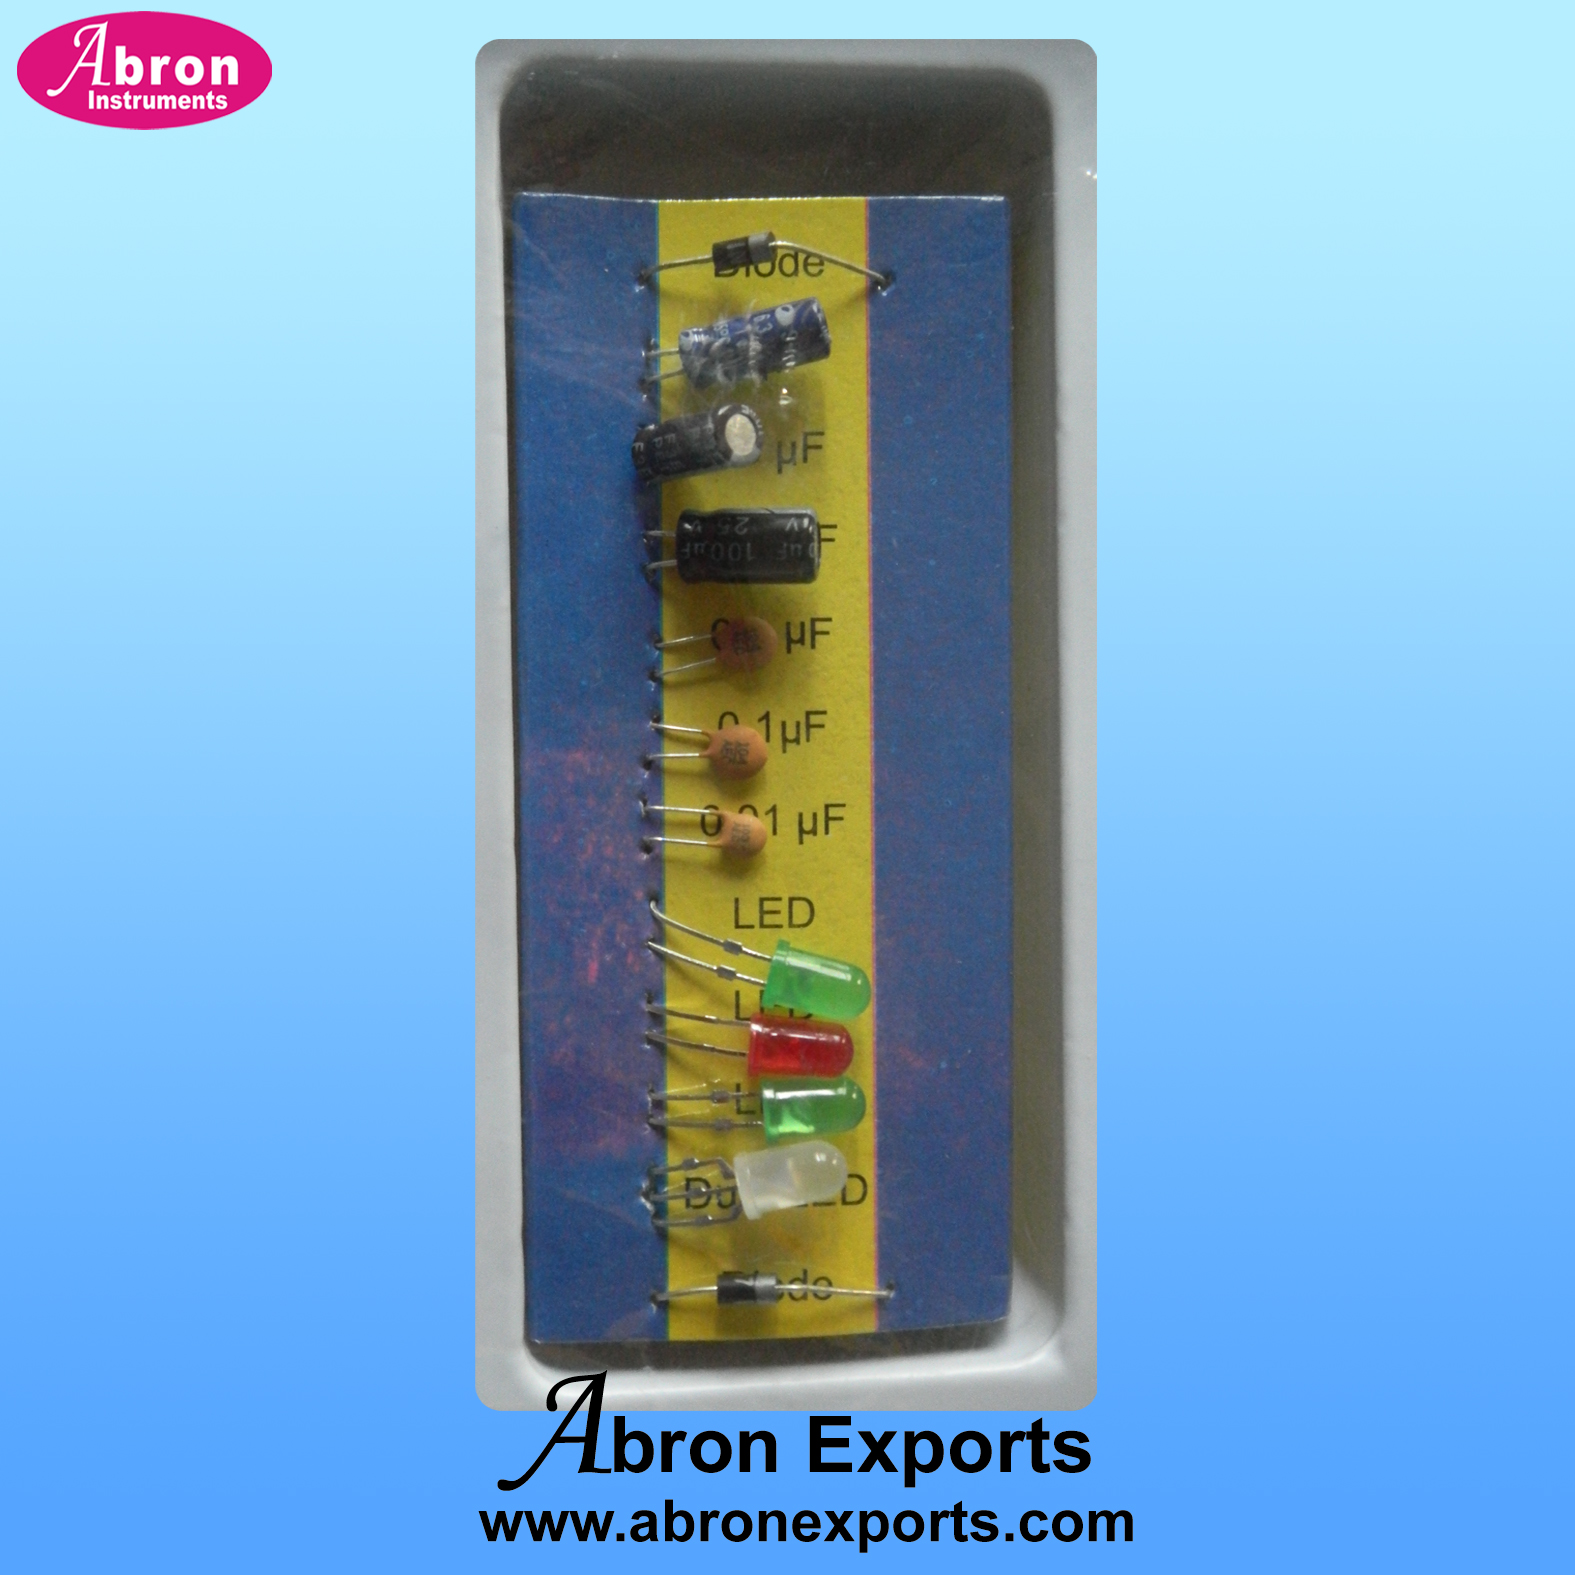 Electronic component abron kit circuit resistance diode capacitor diode led ldr abron AE-1224K